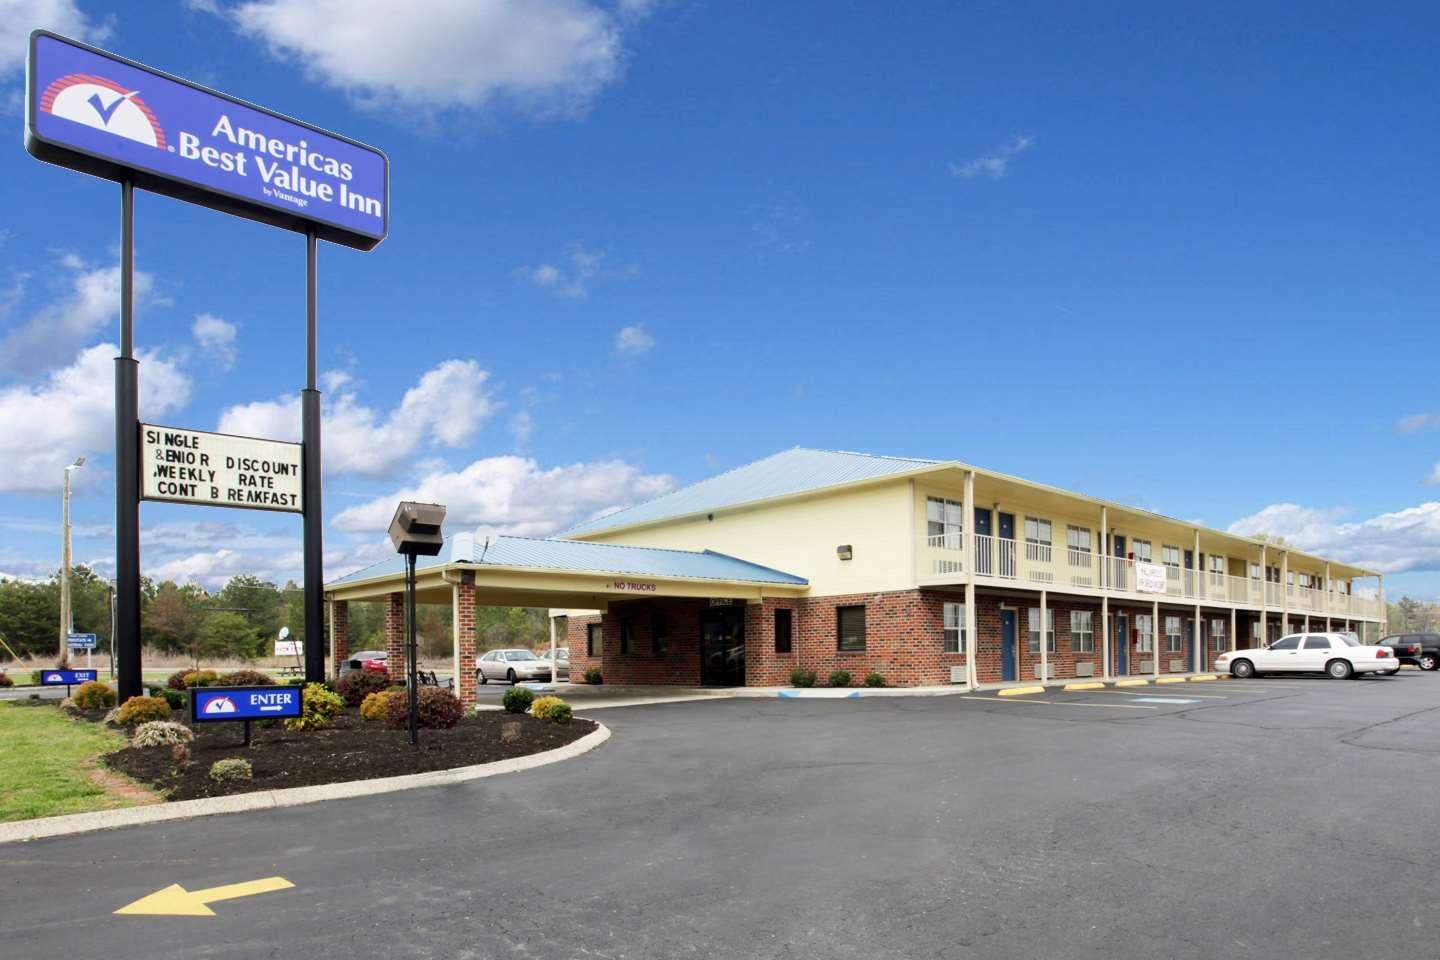 Hotel exterior with ample parking and sign